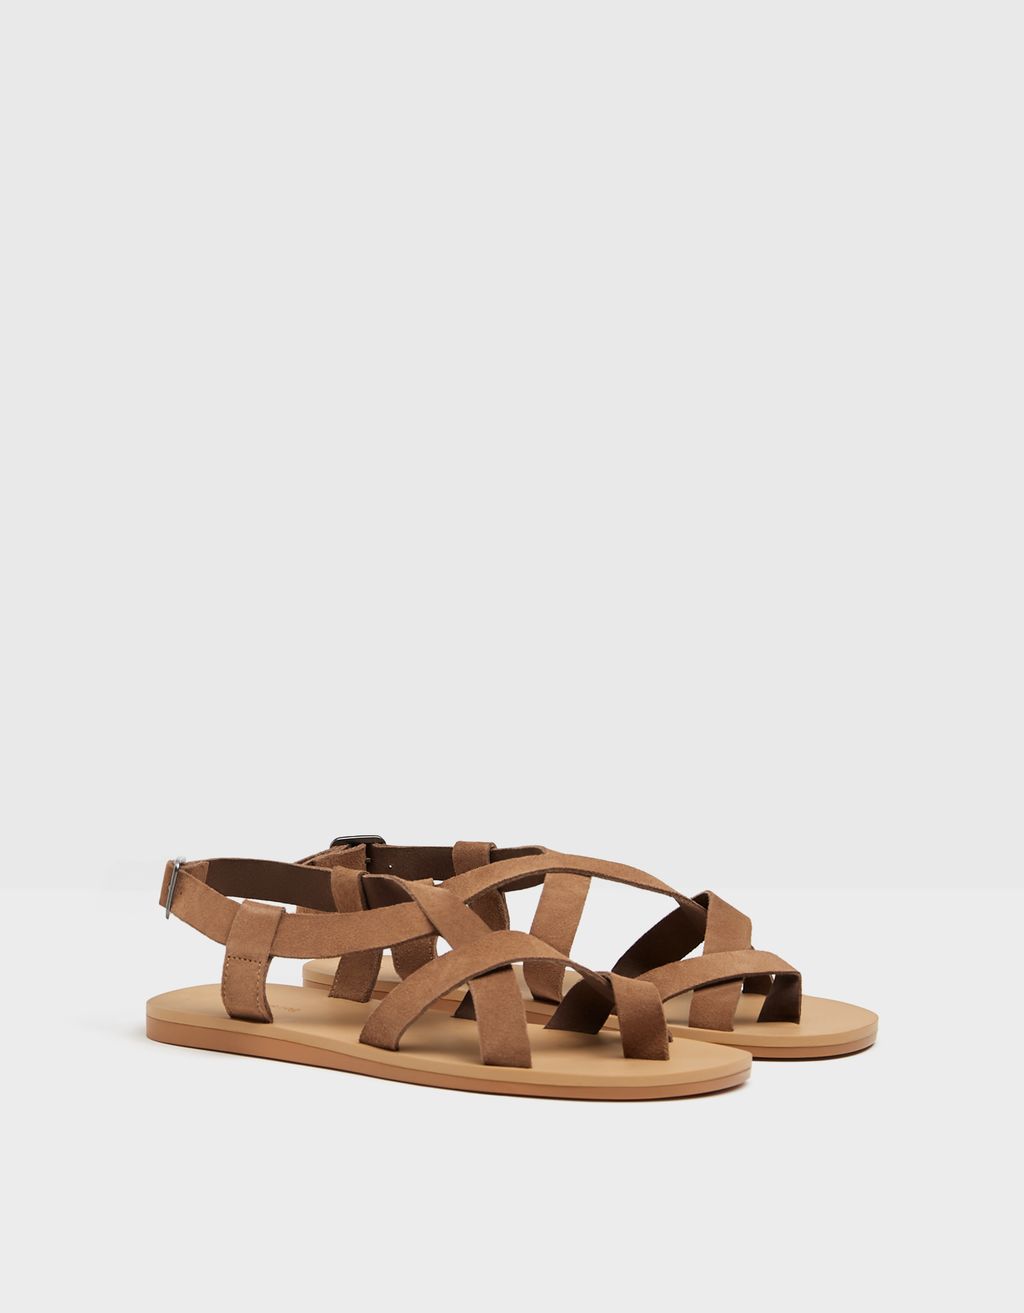 Men's strappy LEATHER sandals. - Shoes - Bershka Costa Rica